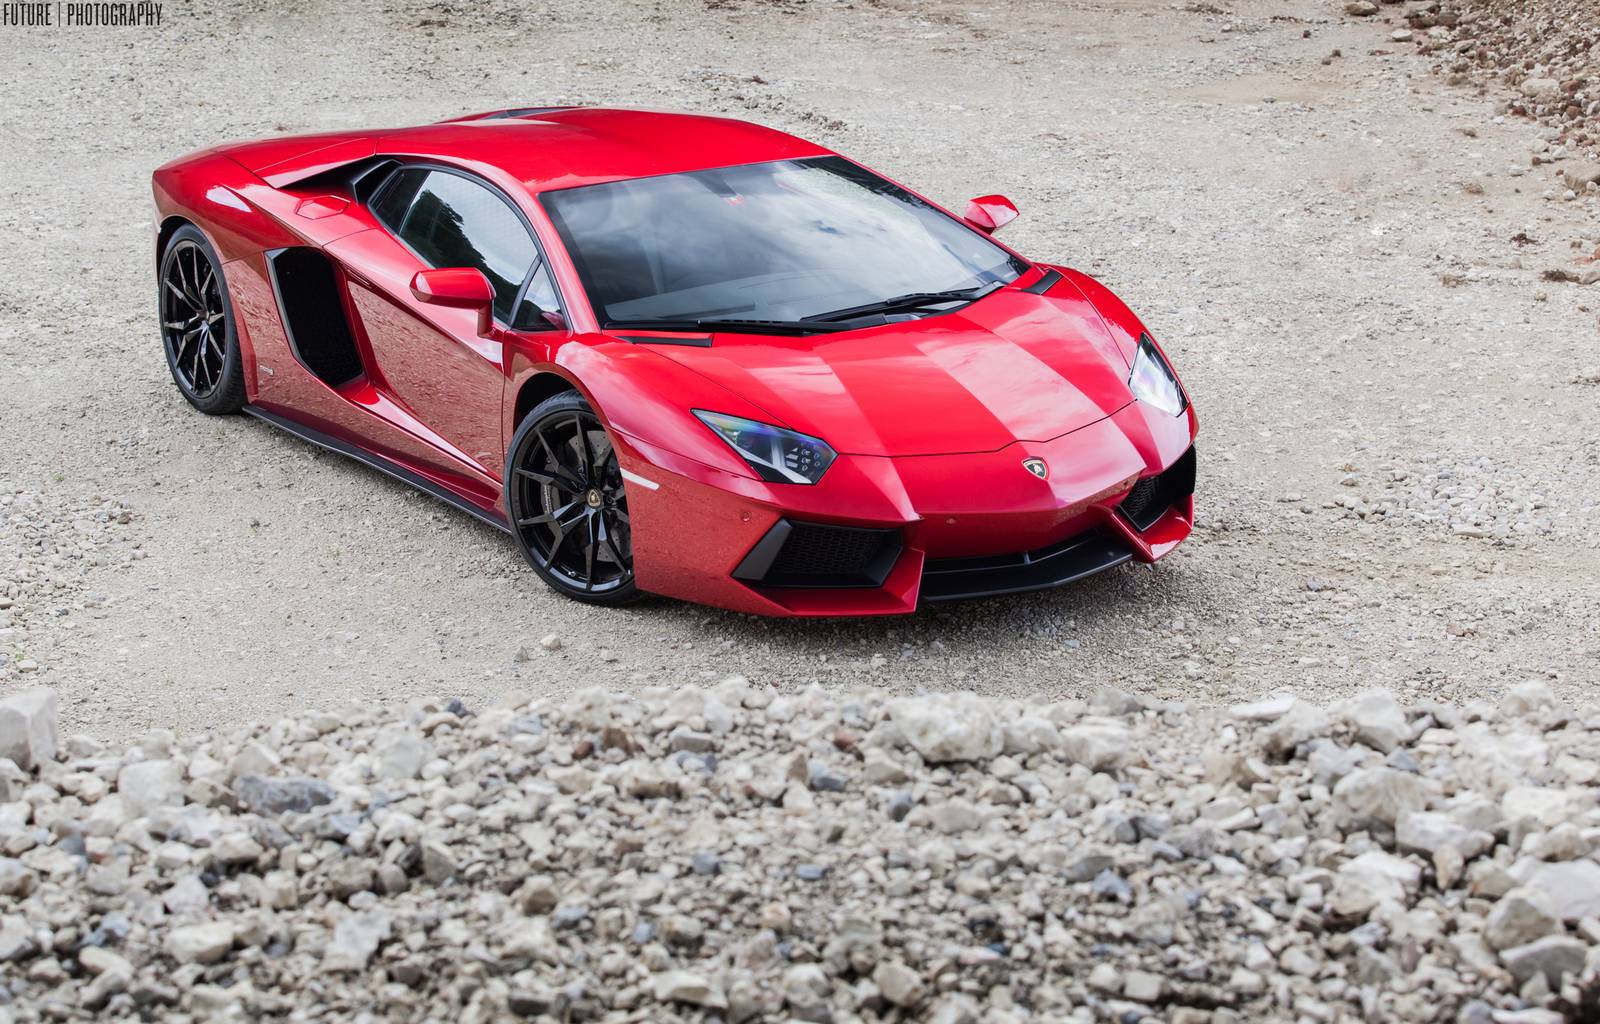 Gallery: Red Lamborghini Aventador With Black Wheels is ...